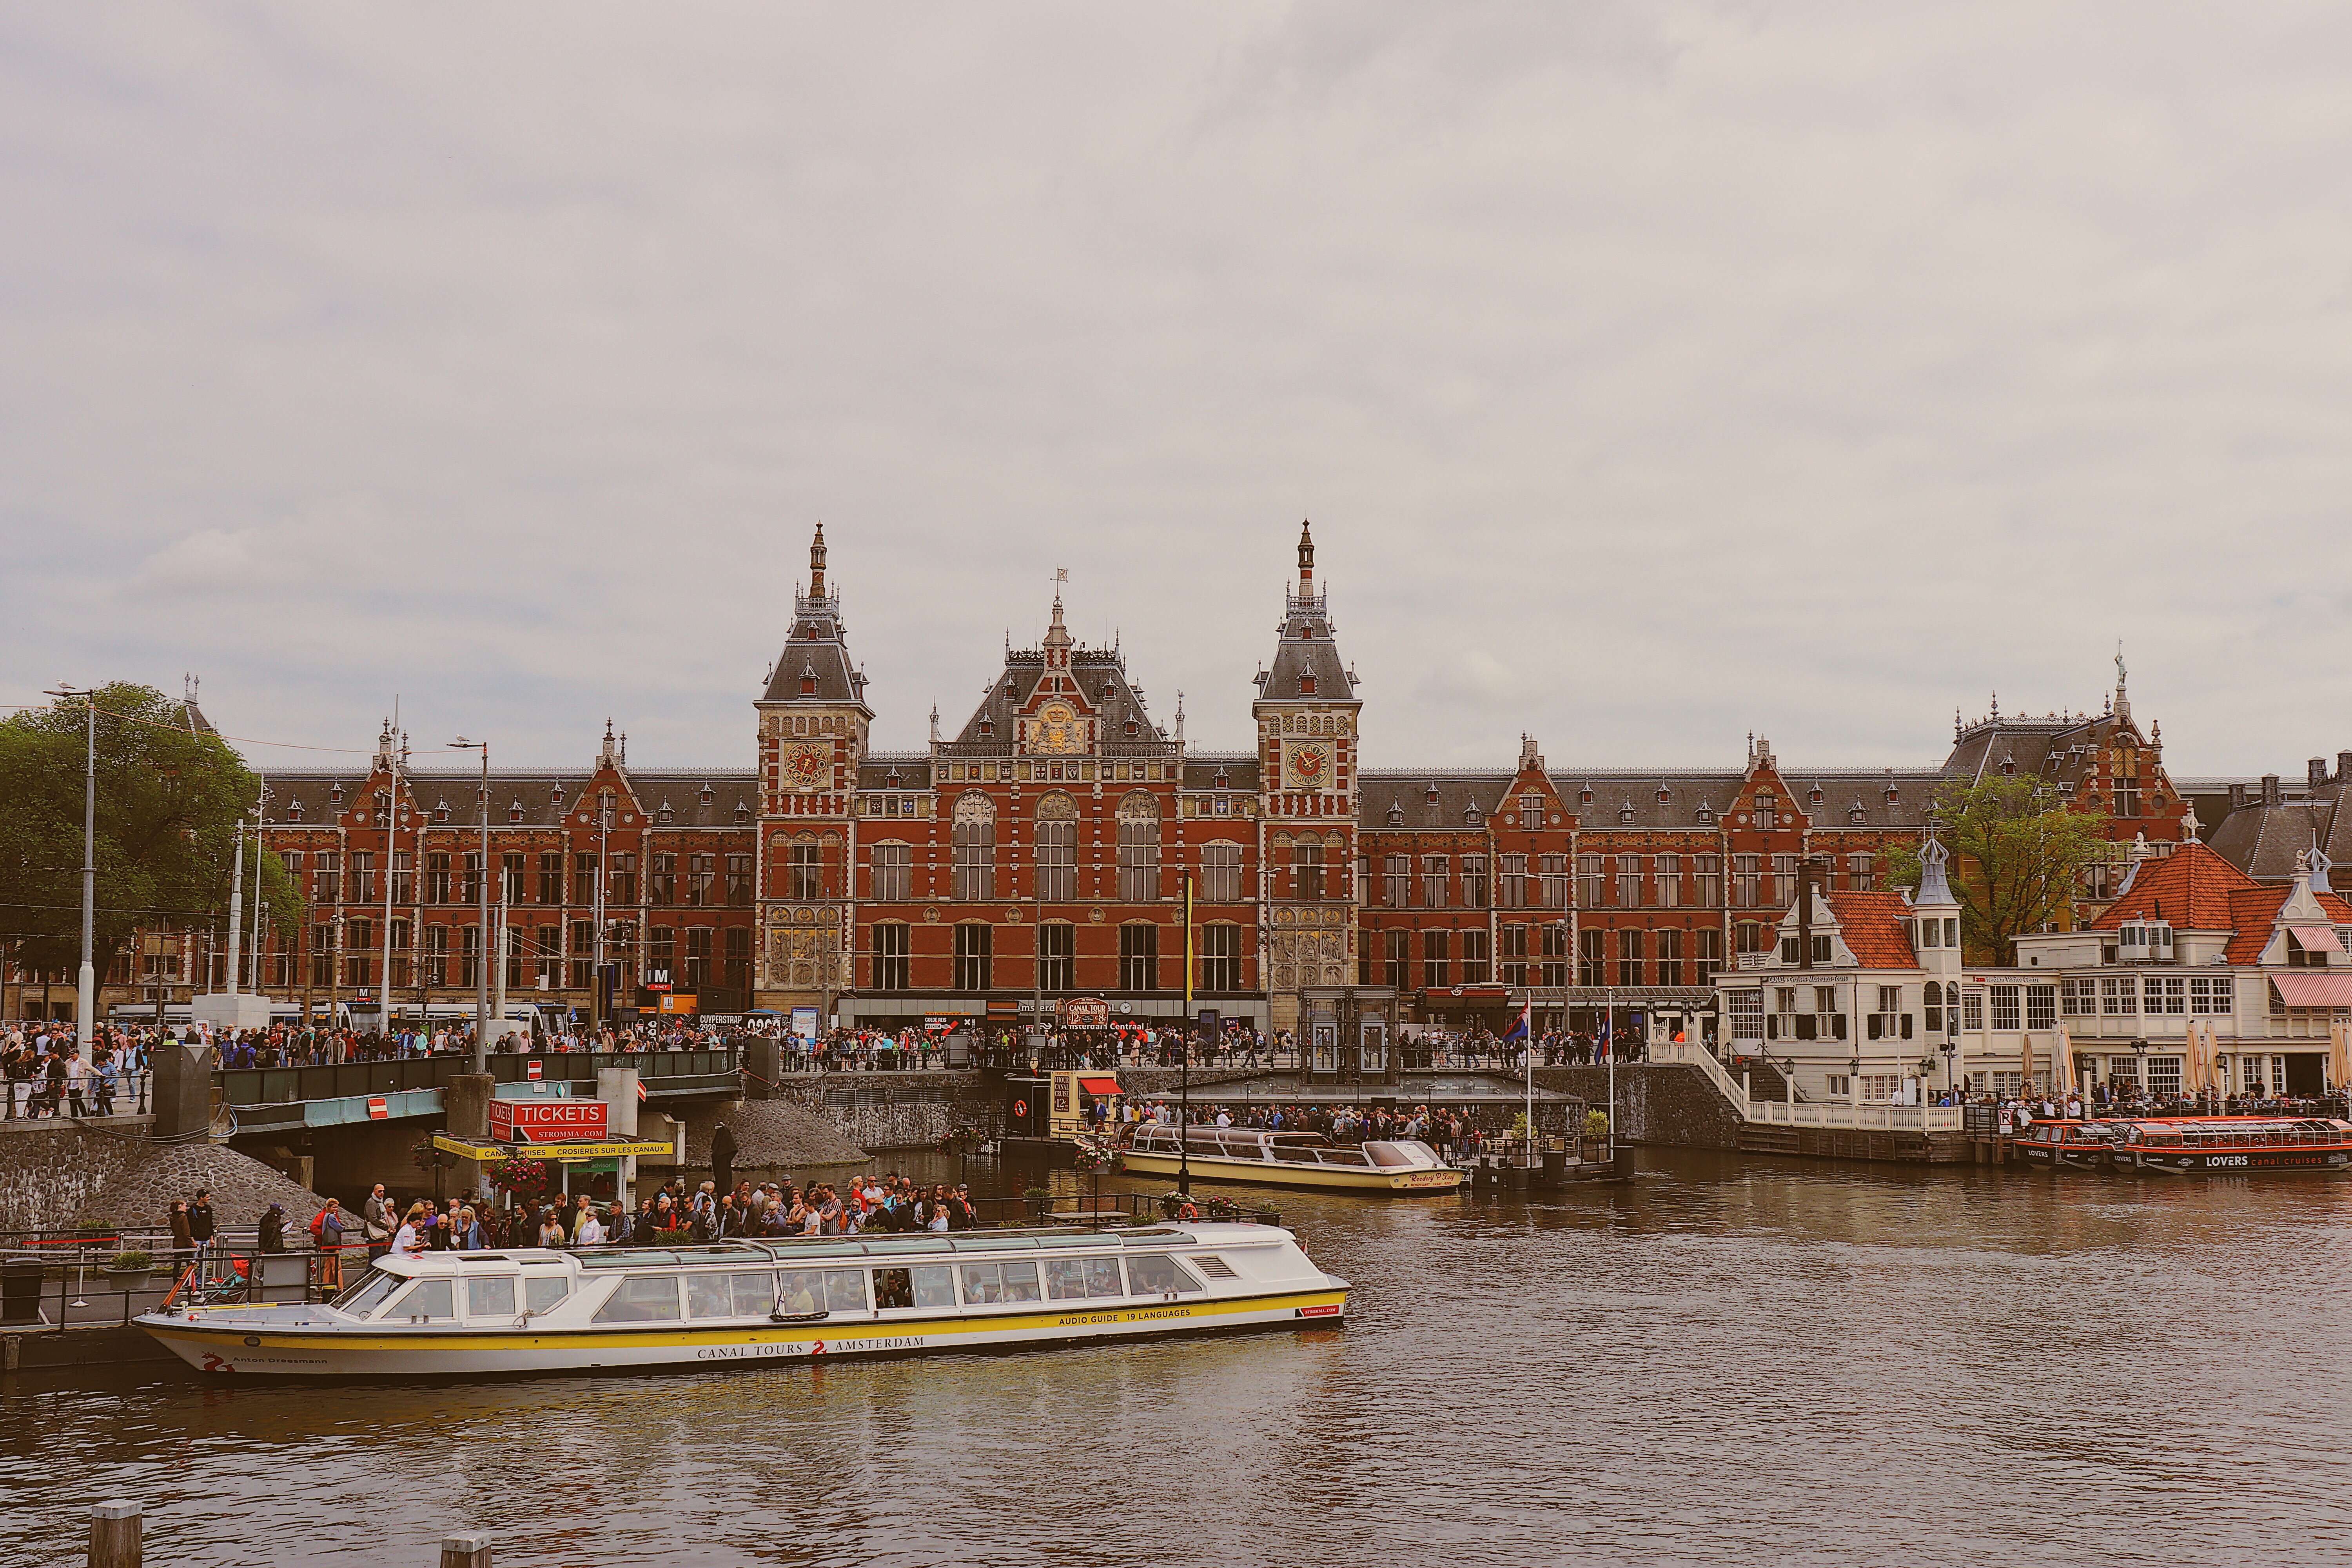 Photo of Amsterdam Centraal with canal boat tours in the water in Amsterdam, Netherlands.